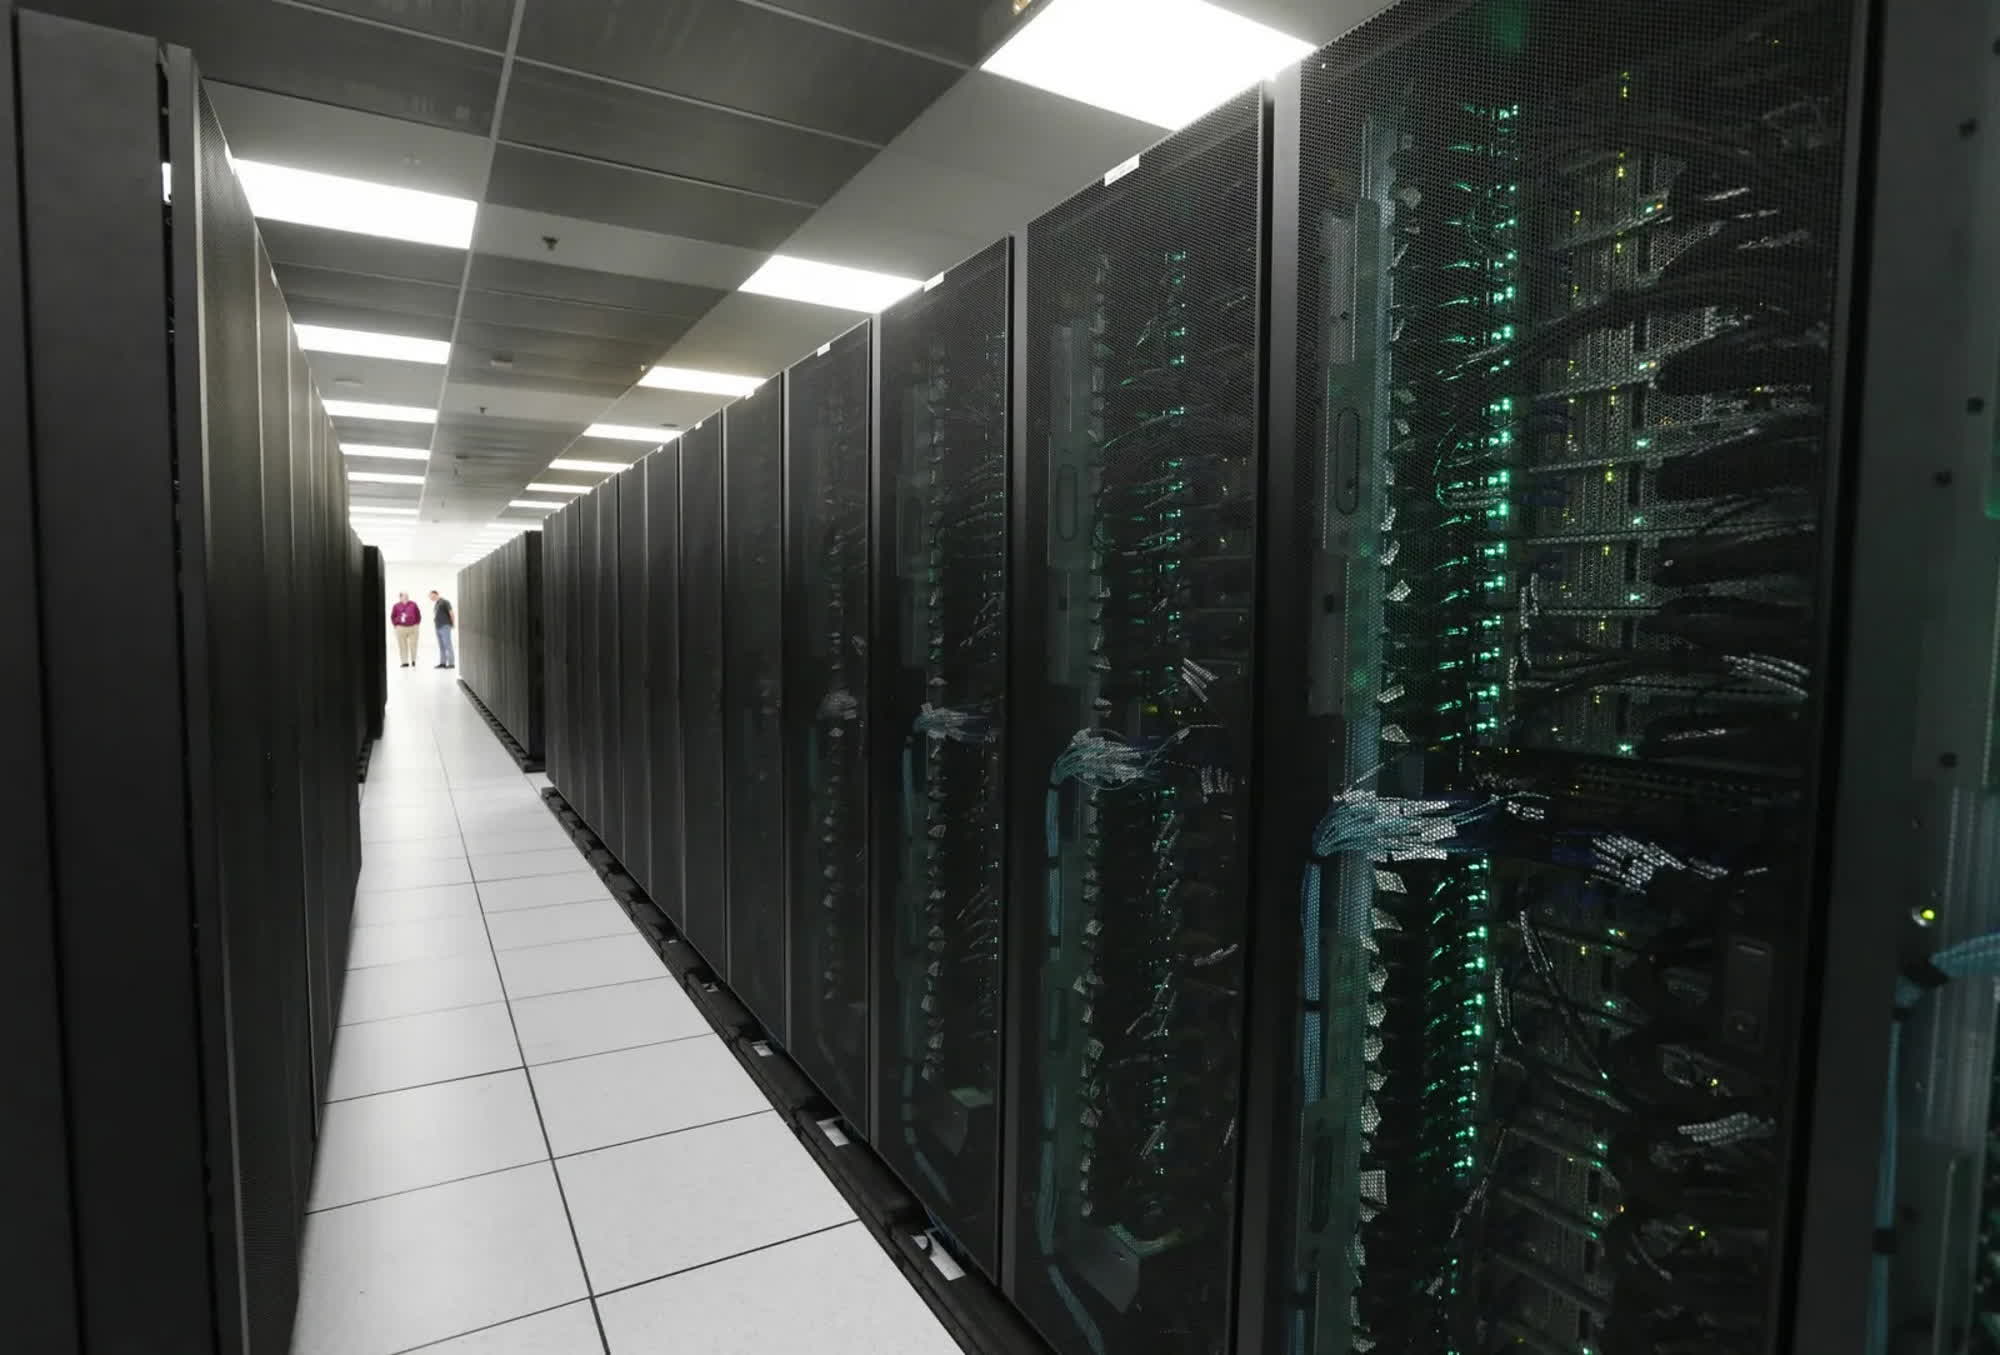 China's new Tianhe supercomputer doubles performance with homegrown tech